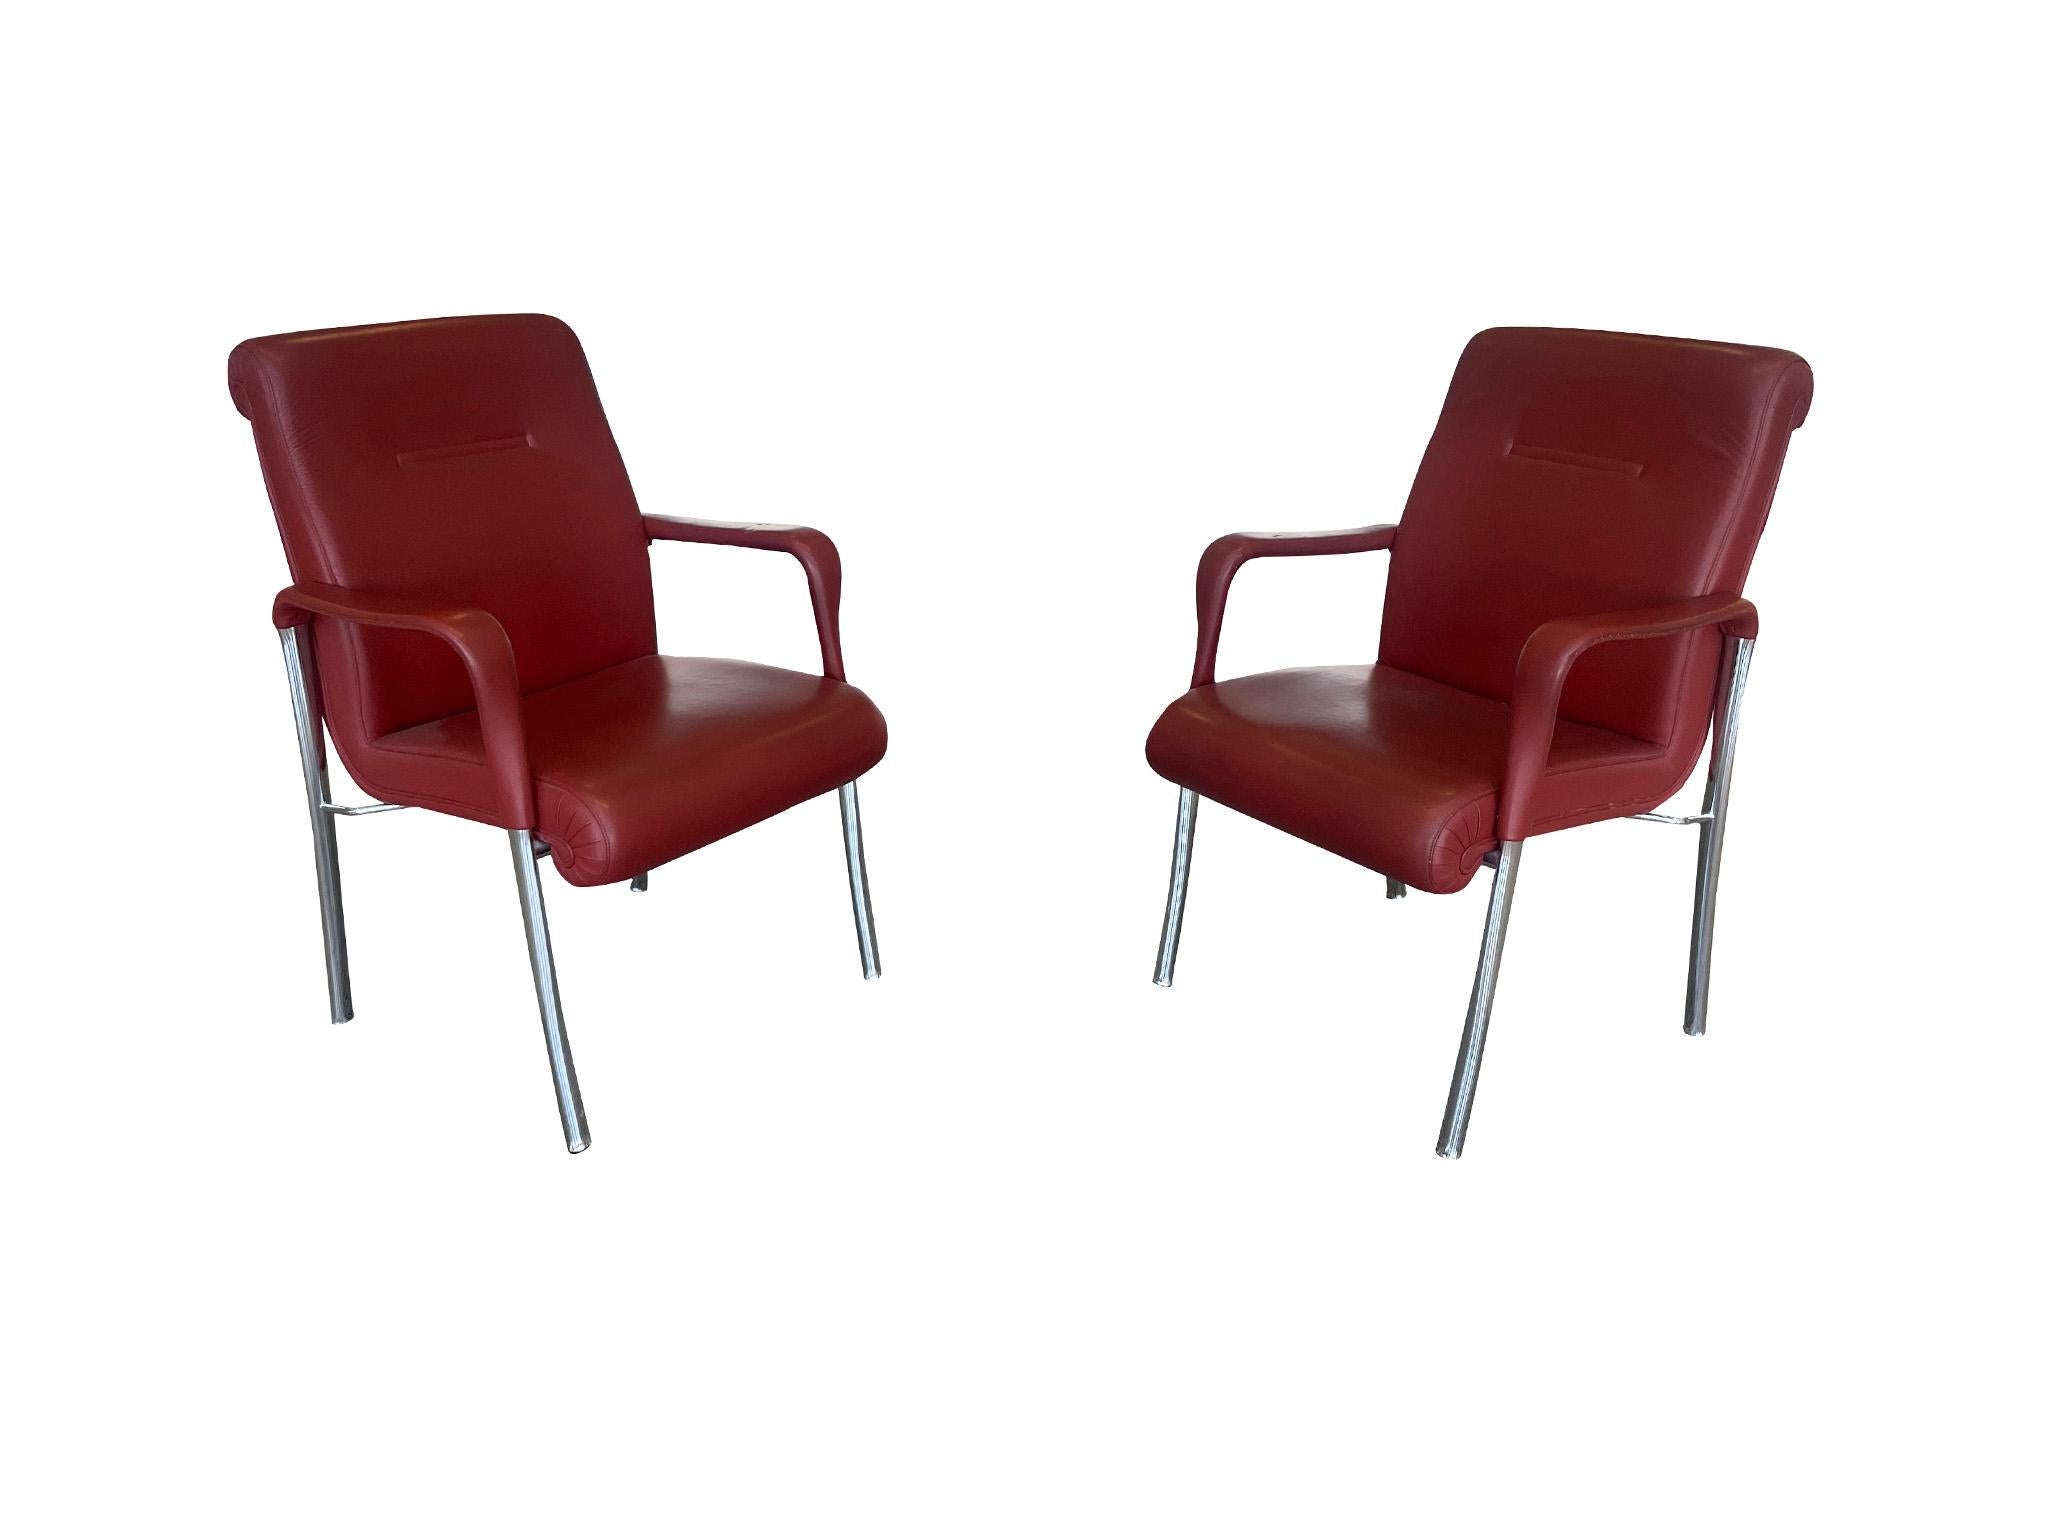 Three Leather Dining or Office Chairs by Poltrona Frau in Oxblood Red Leather In Good Condition For Sale In New York, NY